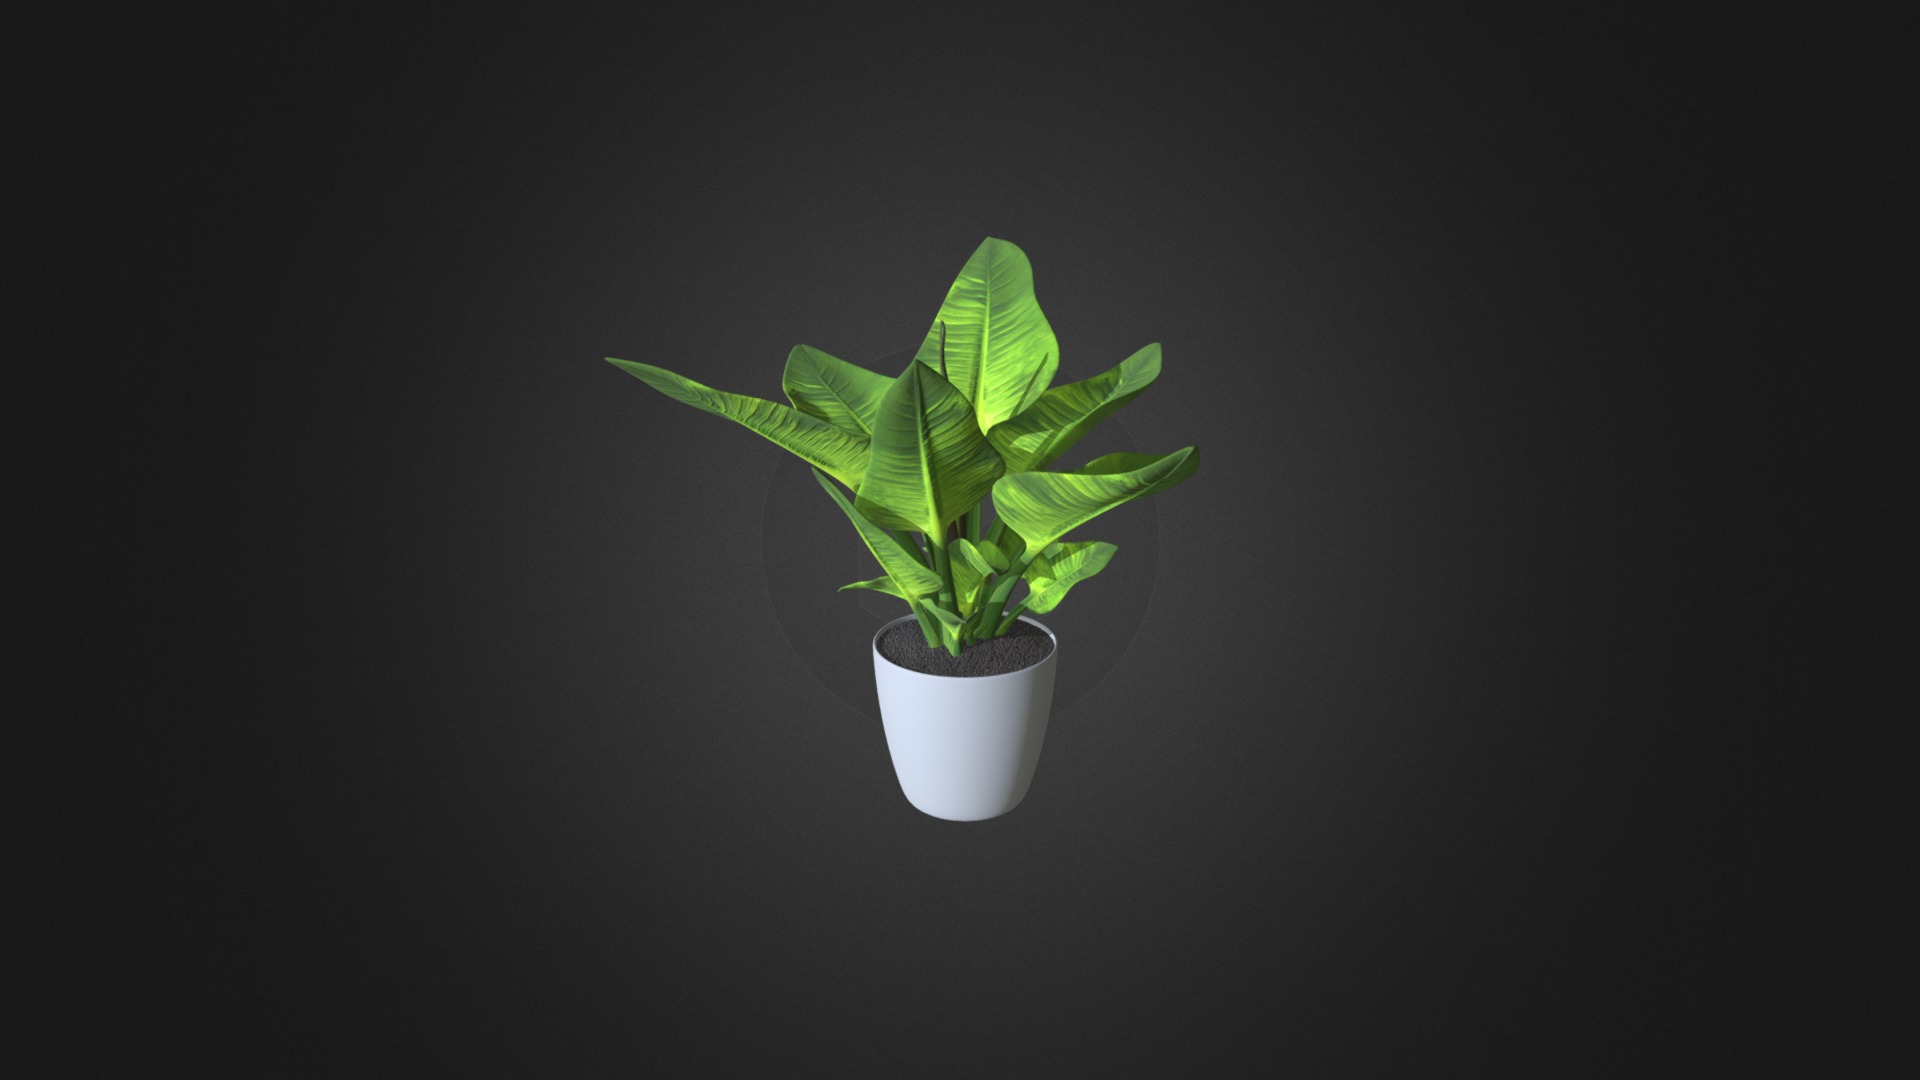 3D model Convexshapes Potted Plant 11 - This is a 3D model of the Convexshapes Potted Plant 11. The 3D model is about a plant in a pot.